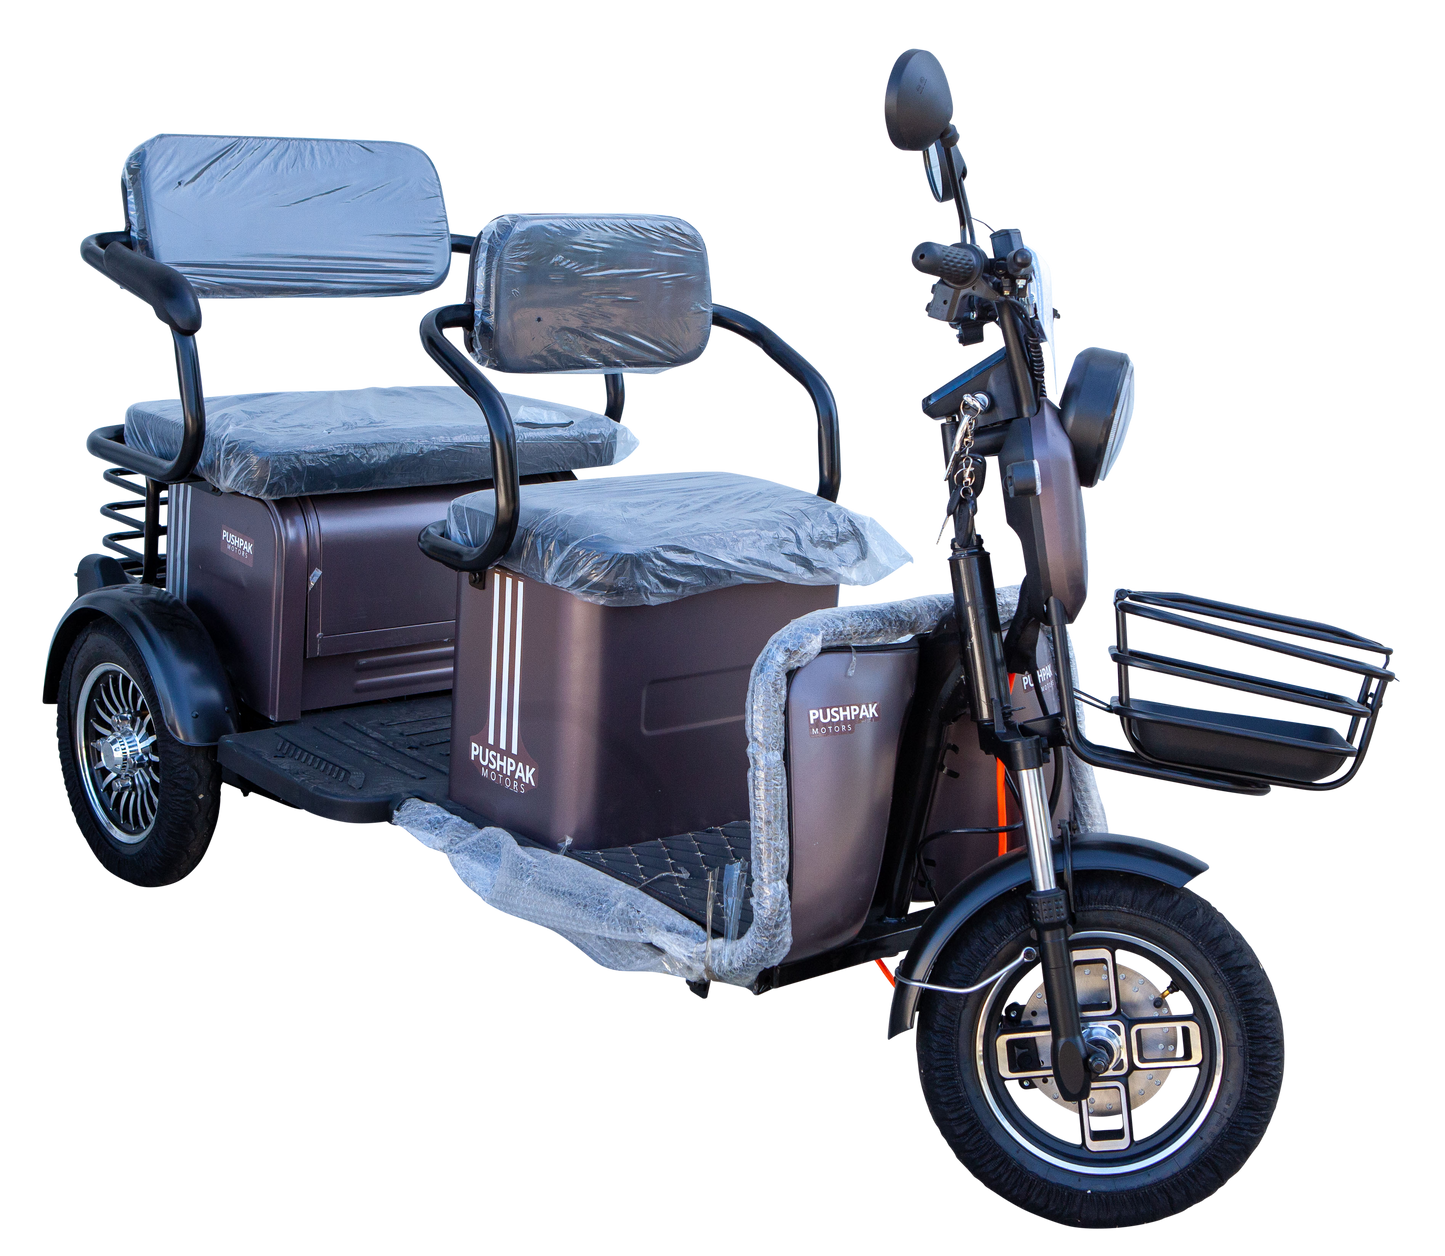 Pushpak 4000 3-Wheel 2-Person Mobility Scooter